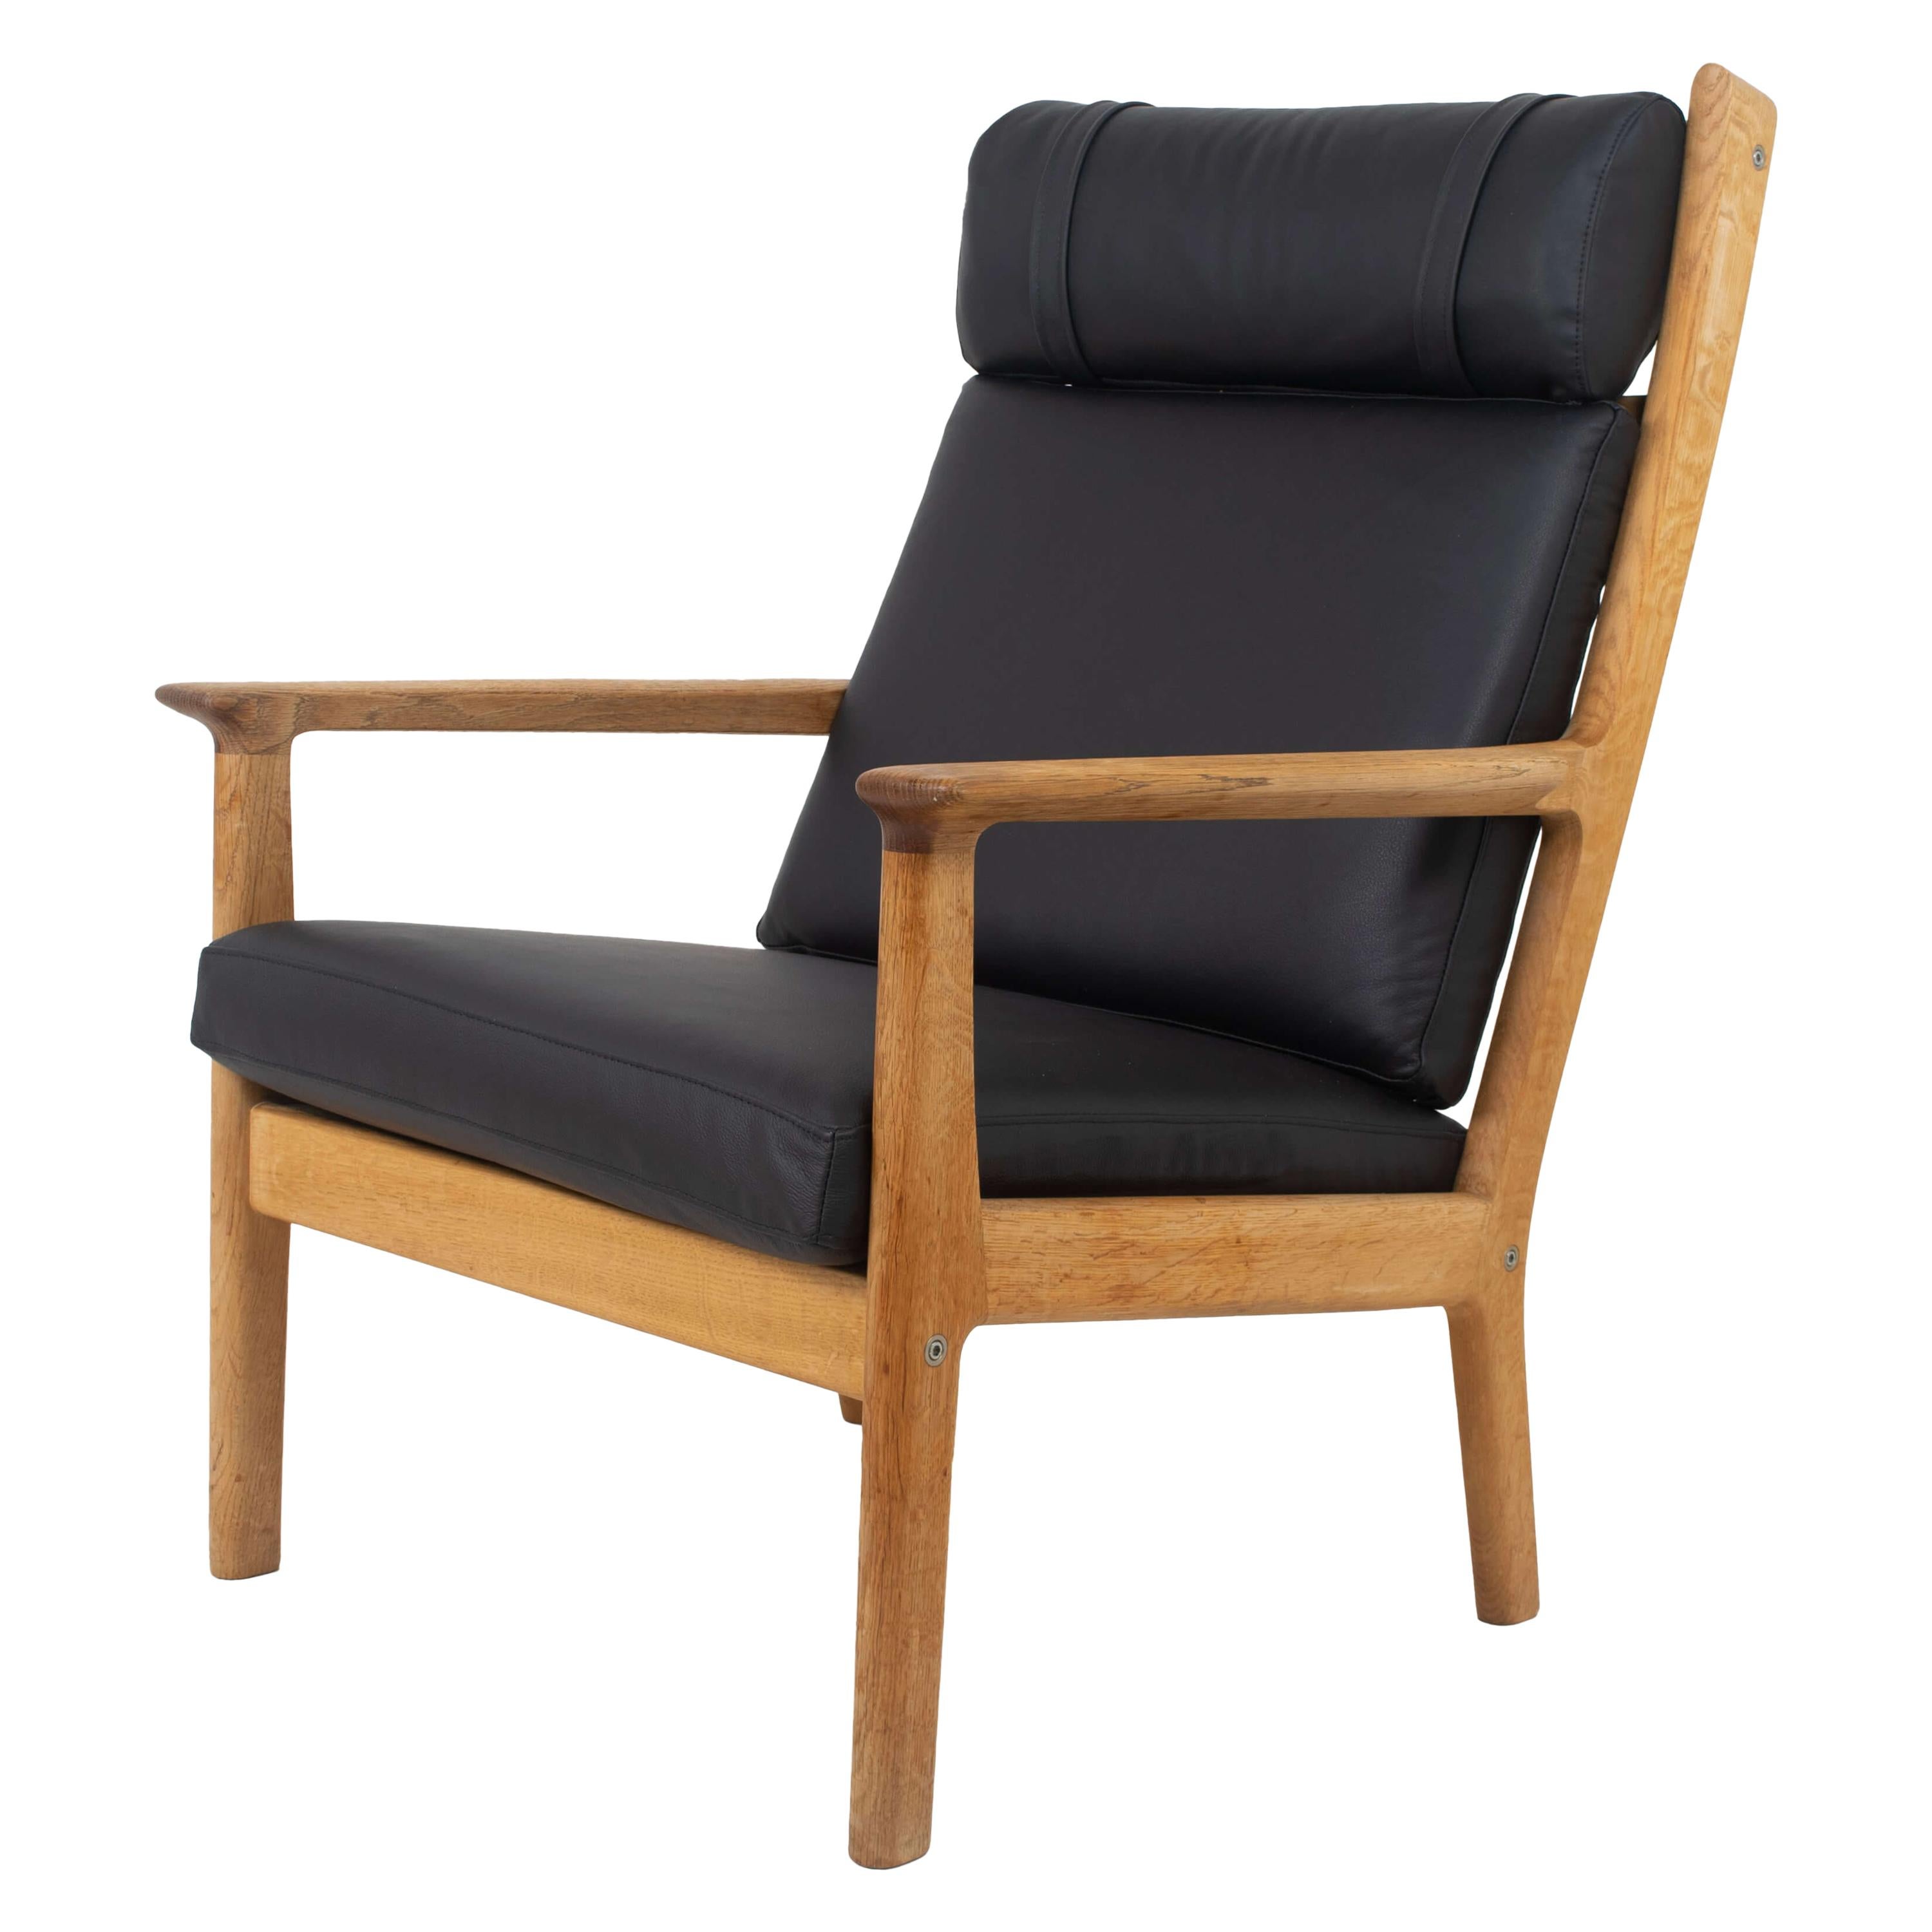 Hans Wegner Fauteuil GE 265 for GETAMA in Oak and Black Leather, 1980 For Sale